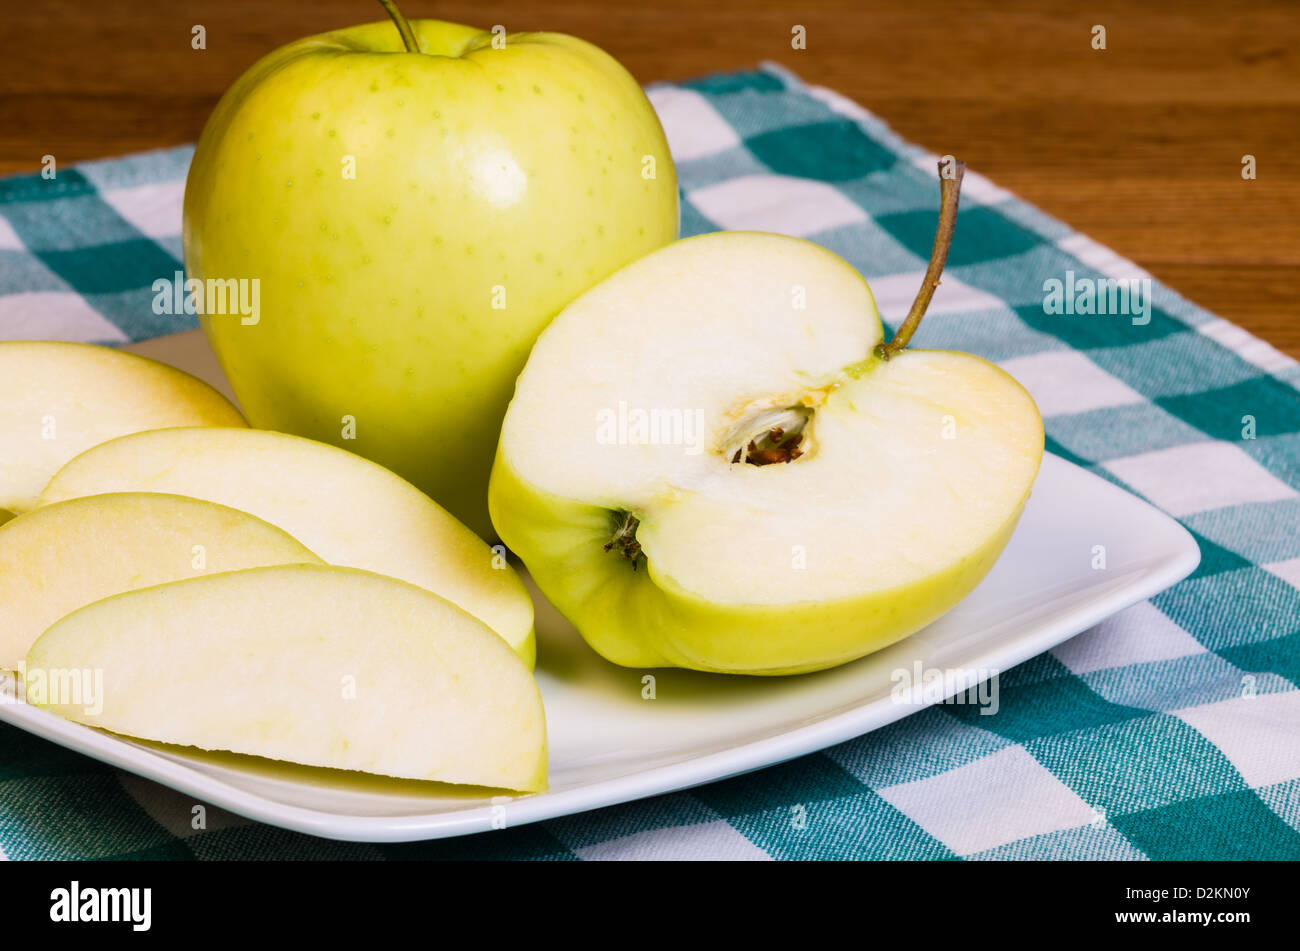 Fresh Golden Delicious apple sliced on a white plate Stock Photo